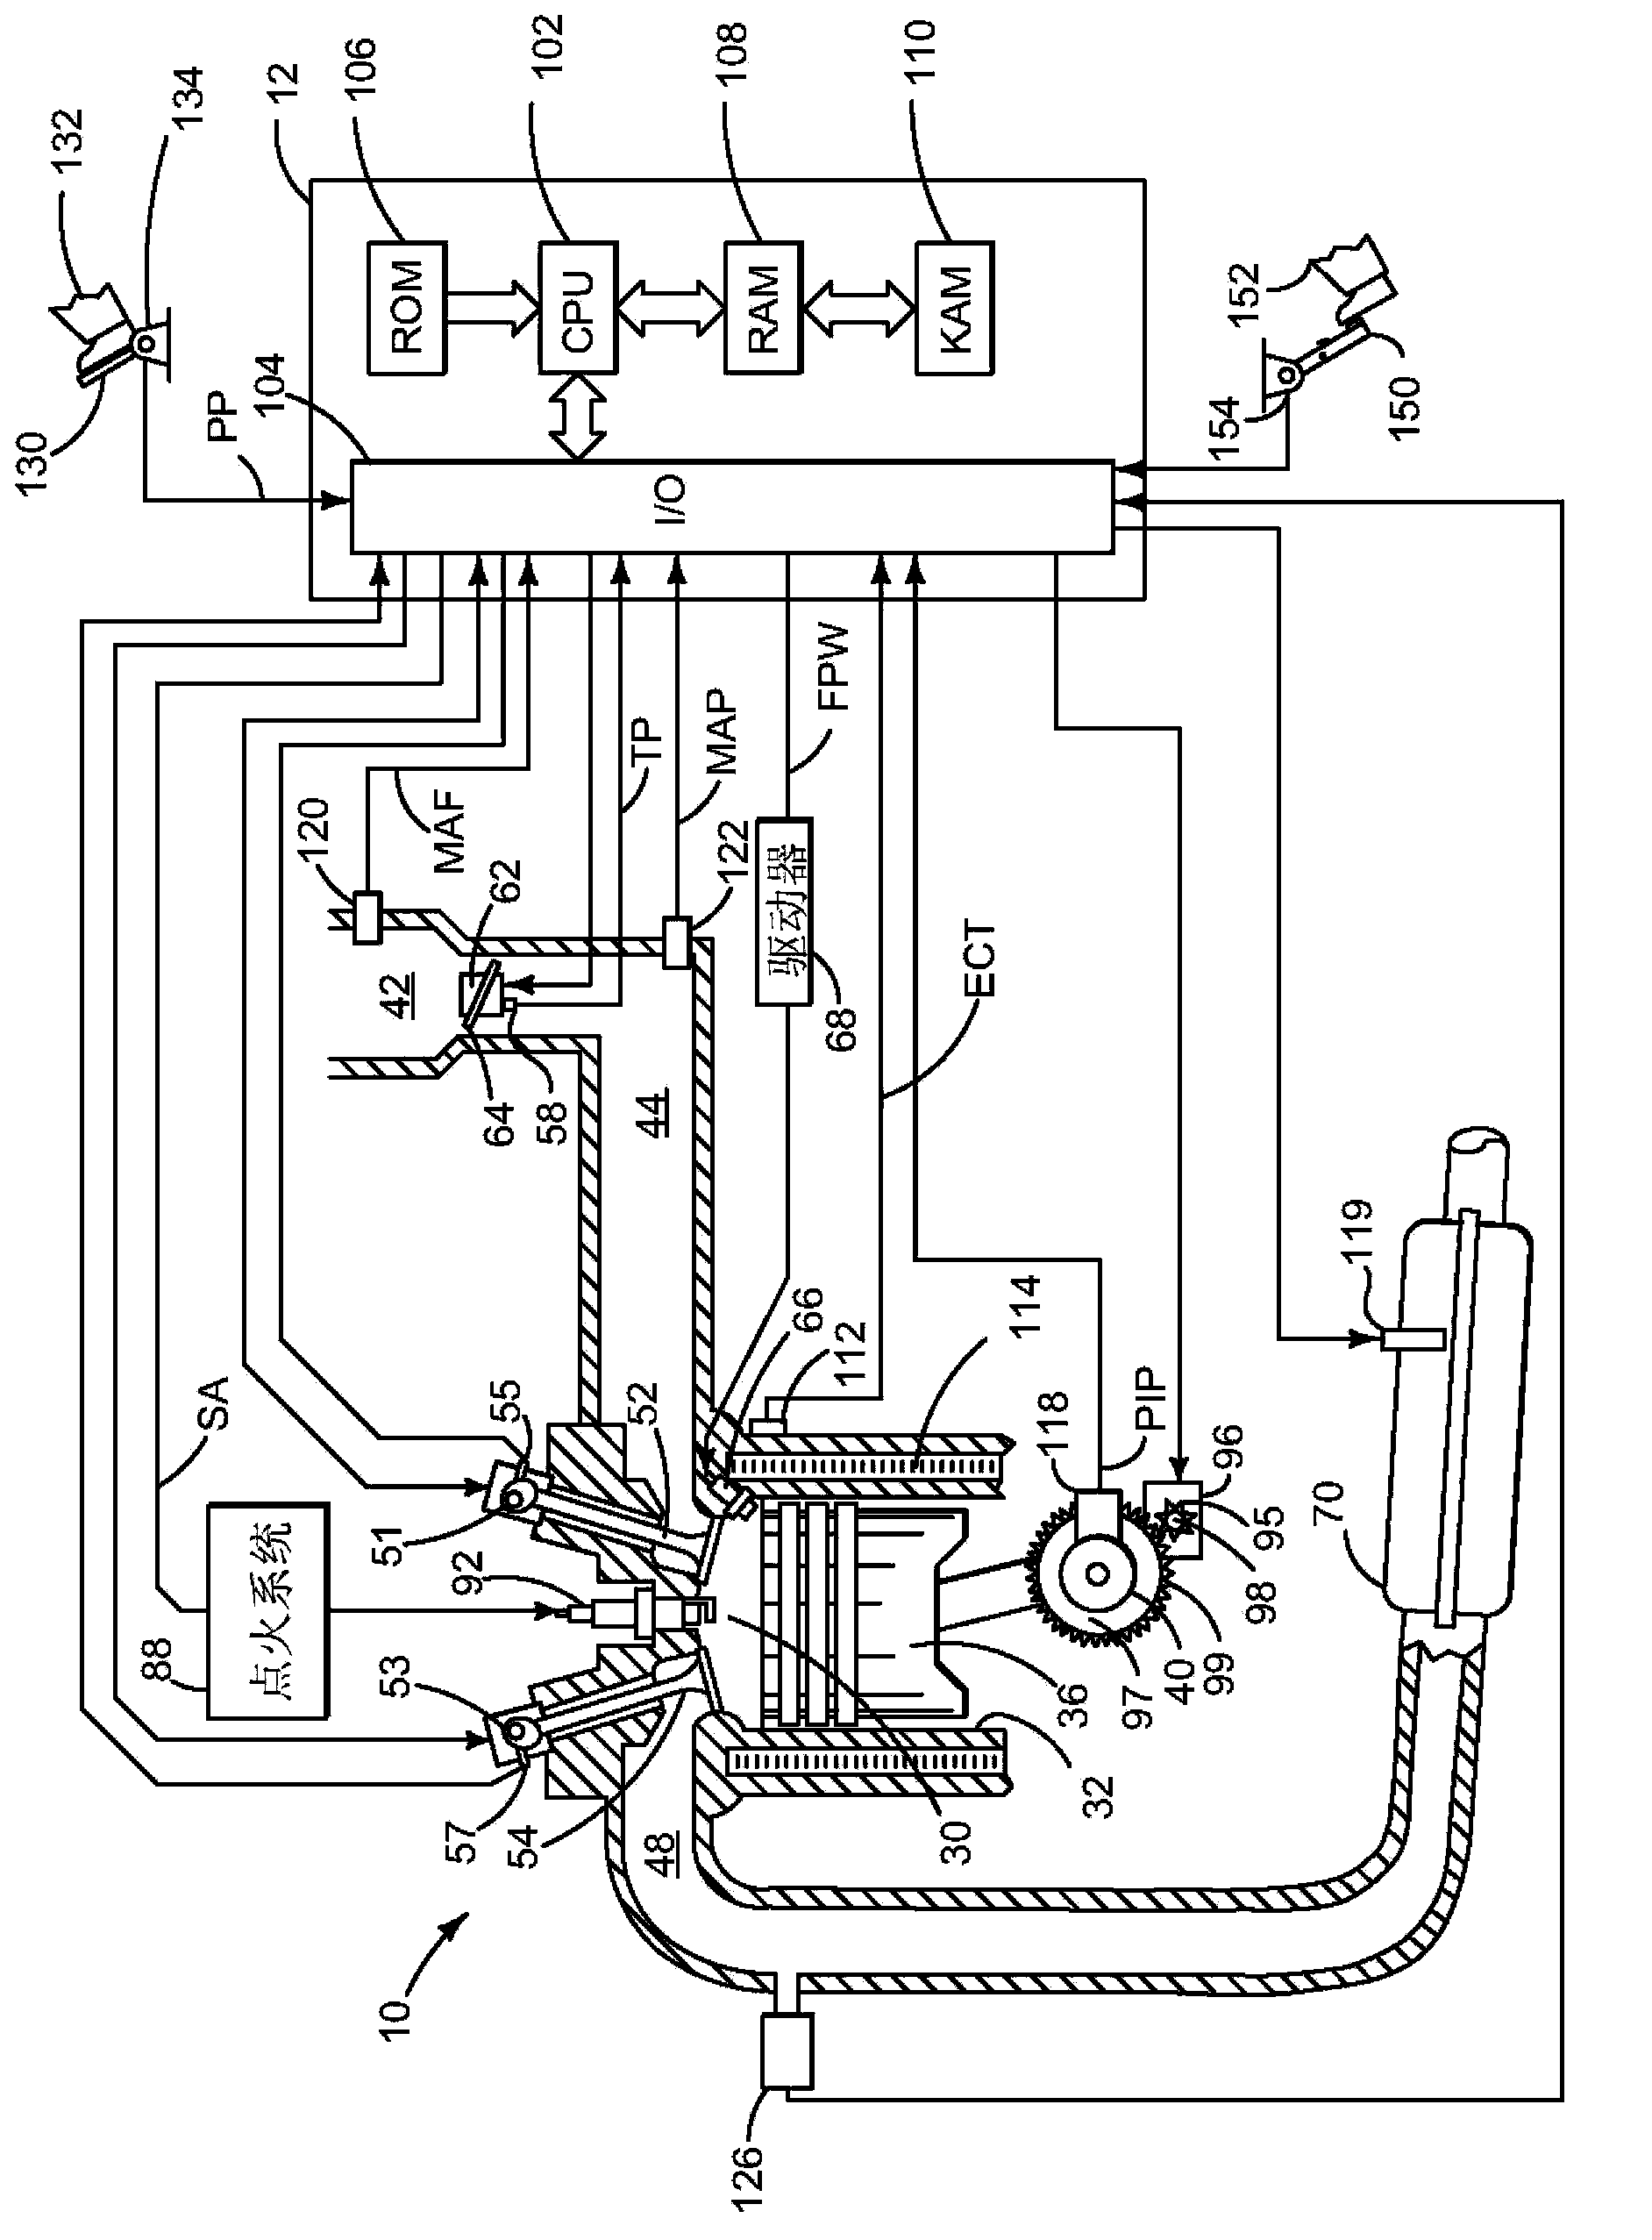 Method and system for improving gear shift of gear box